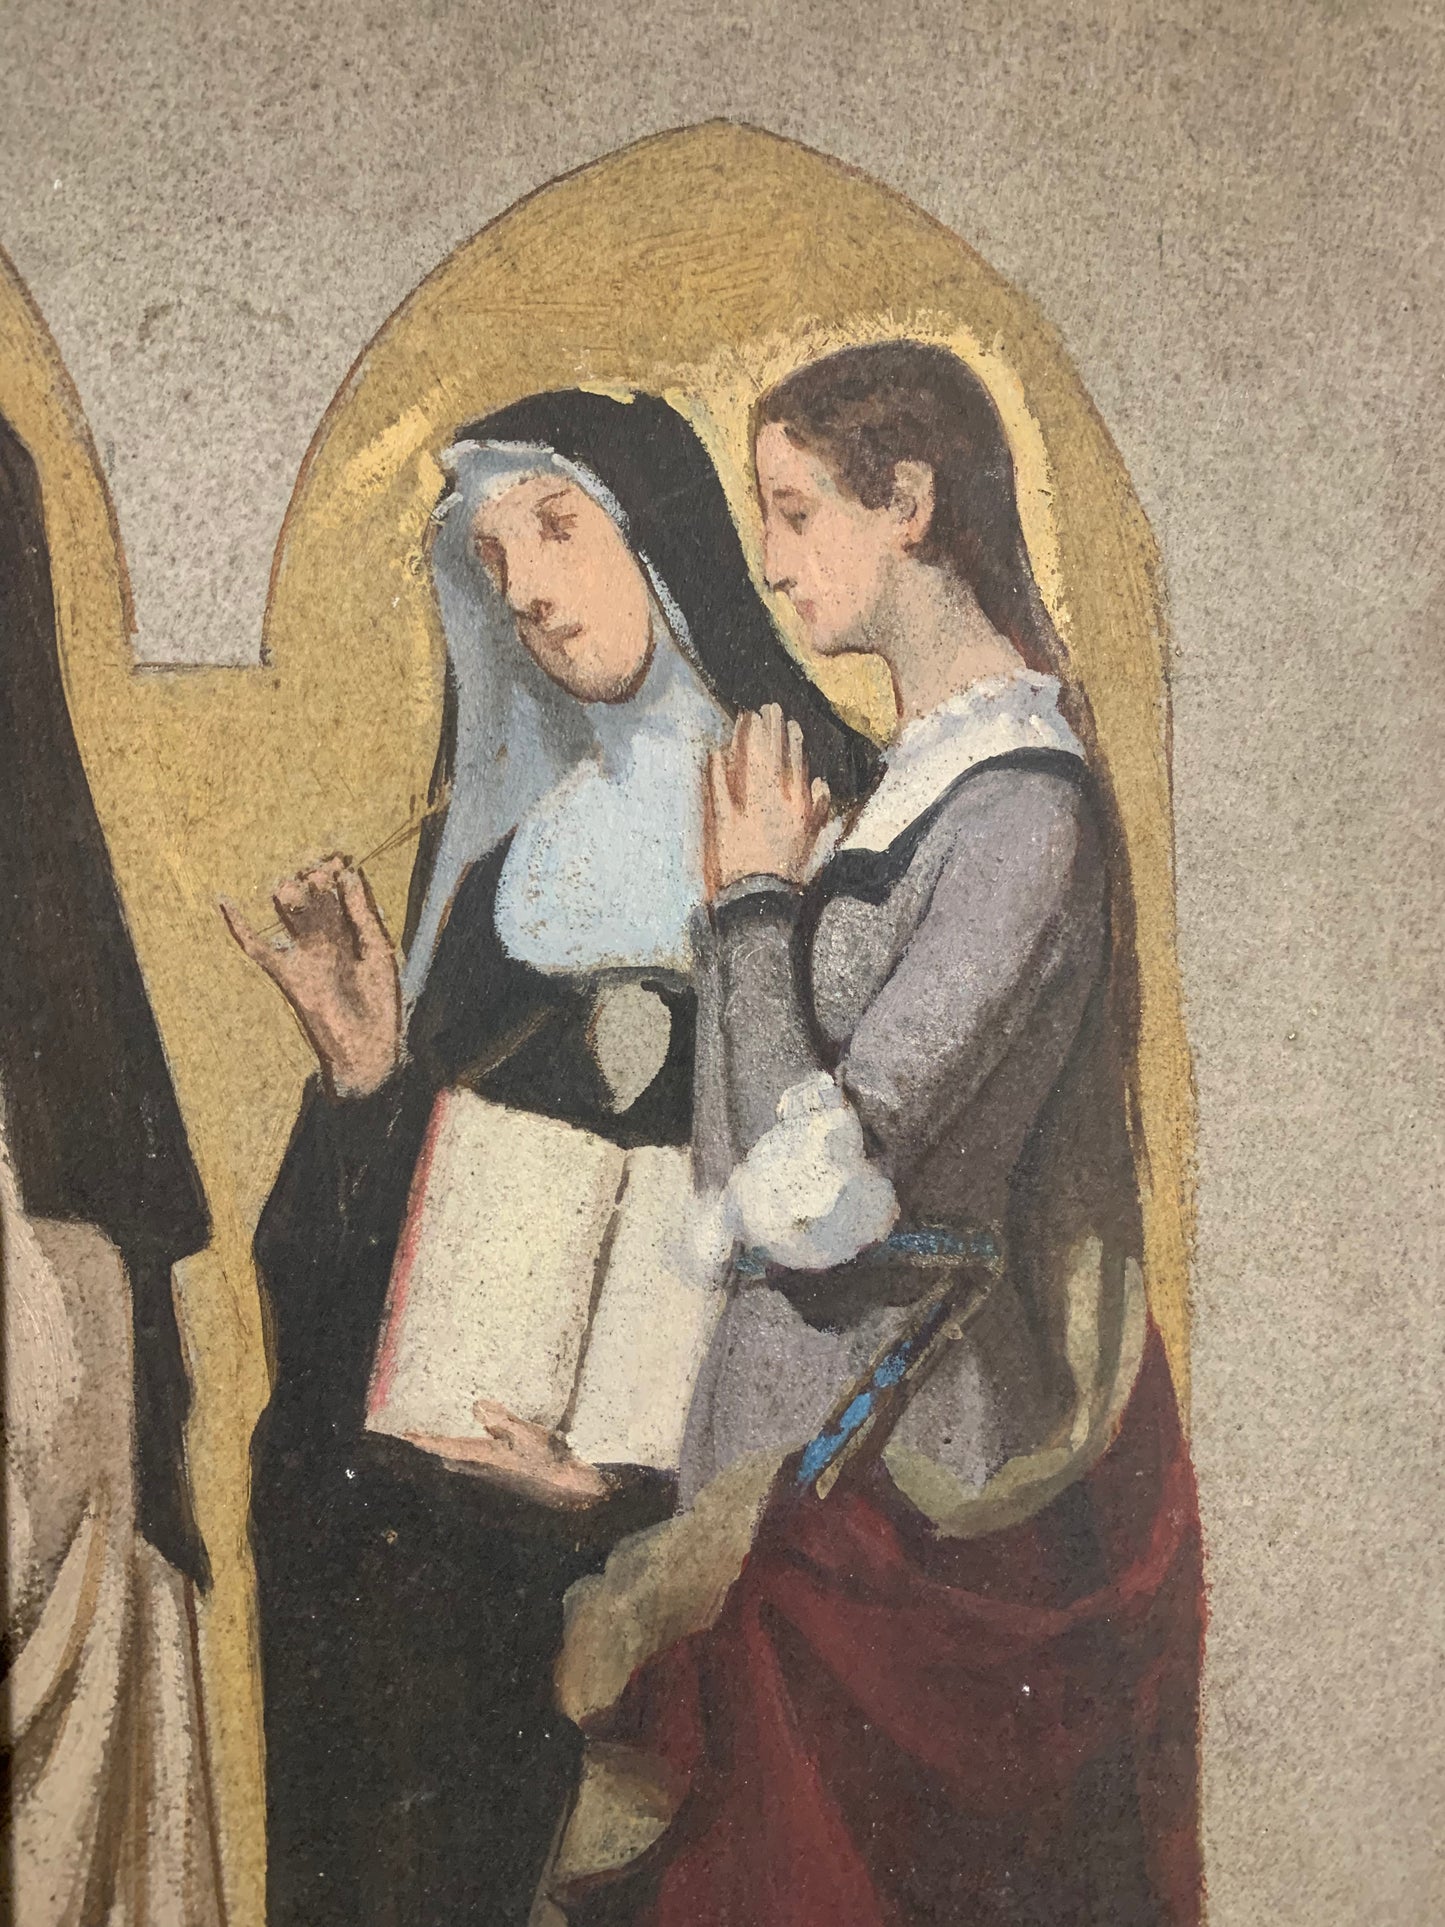 Preparatory sketch with nuns and Mary Magdalene.  Late 19th century.